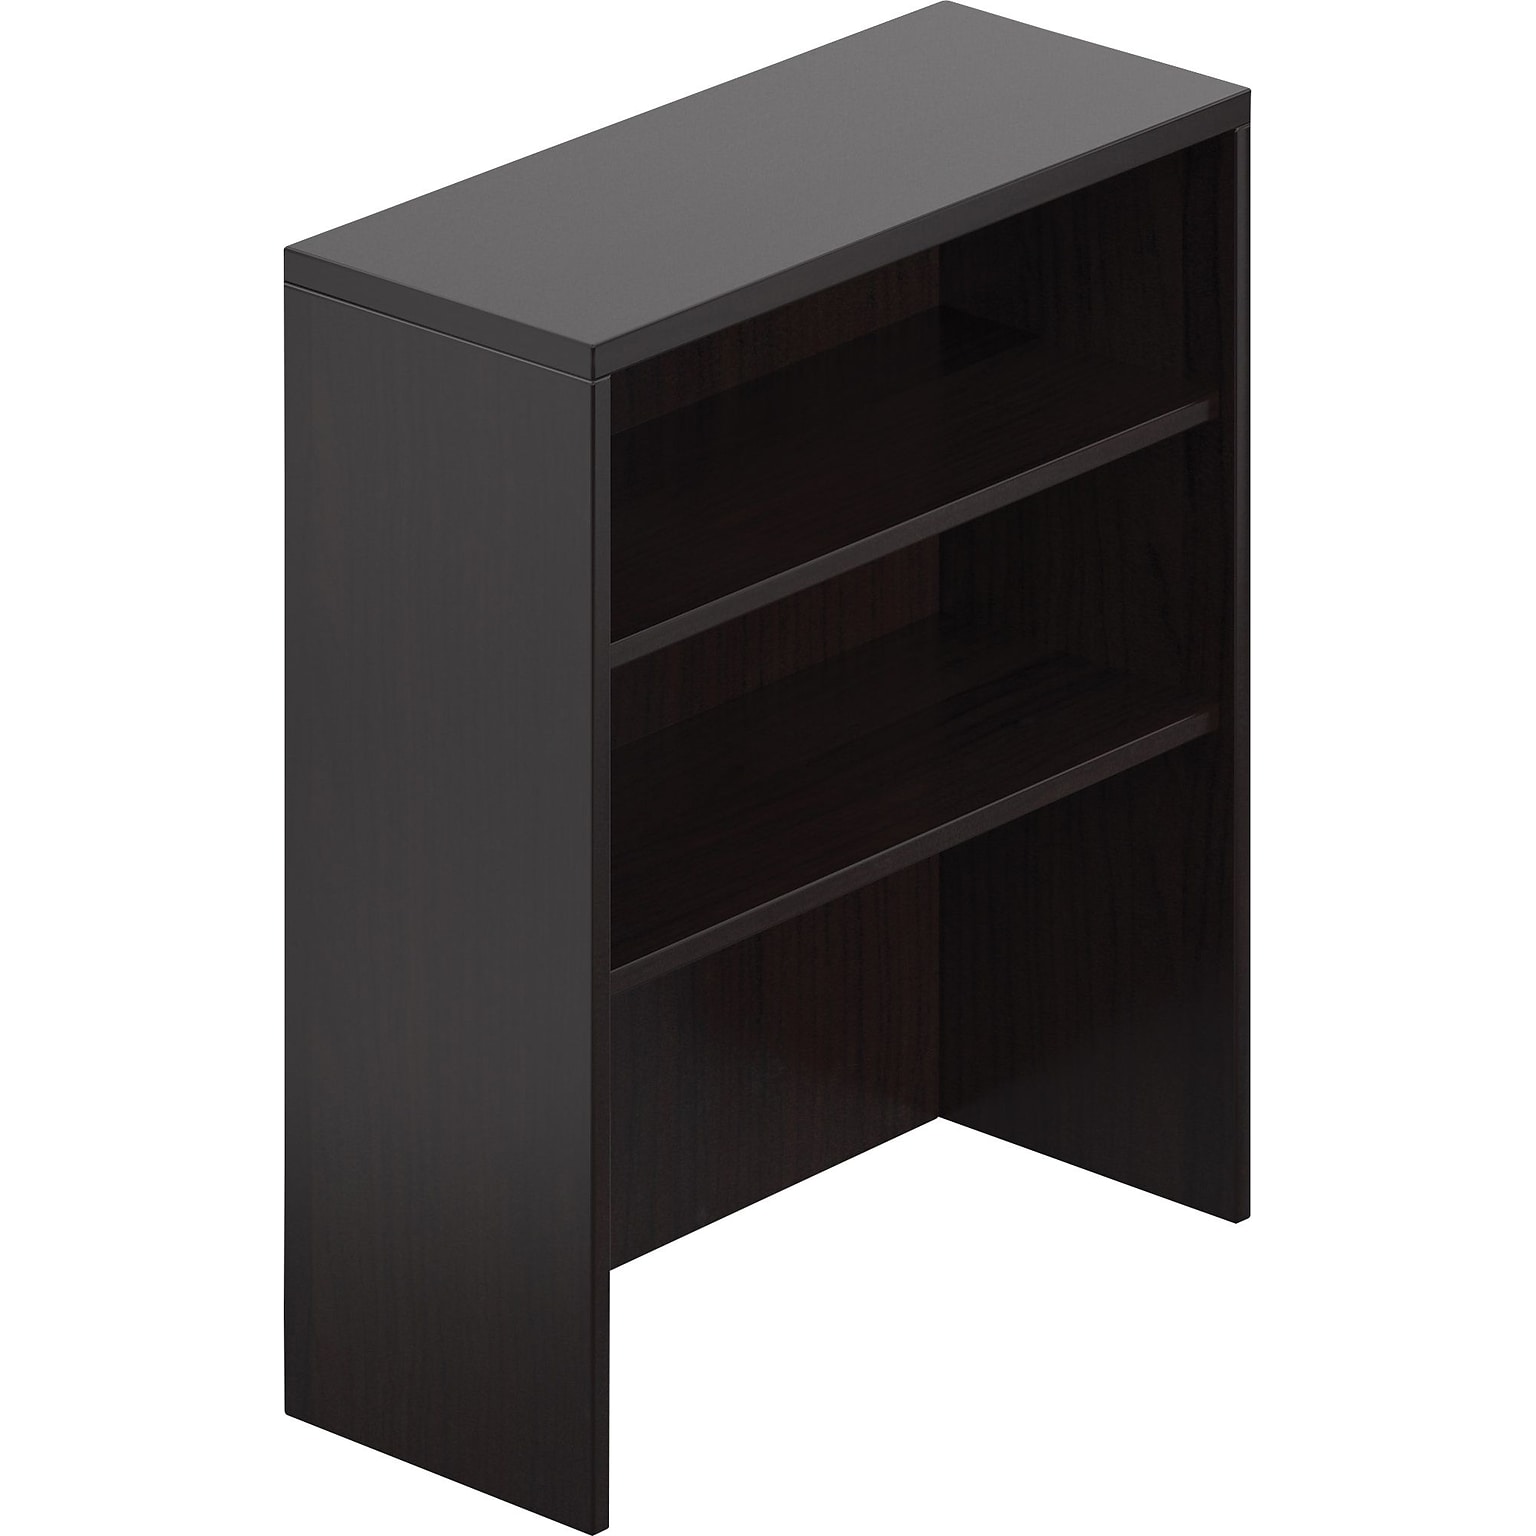 Offices To Go 36 Wide Table Top Bookcase, American Espresso, 2-Shelf, 36H